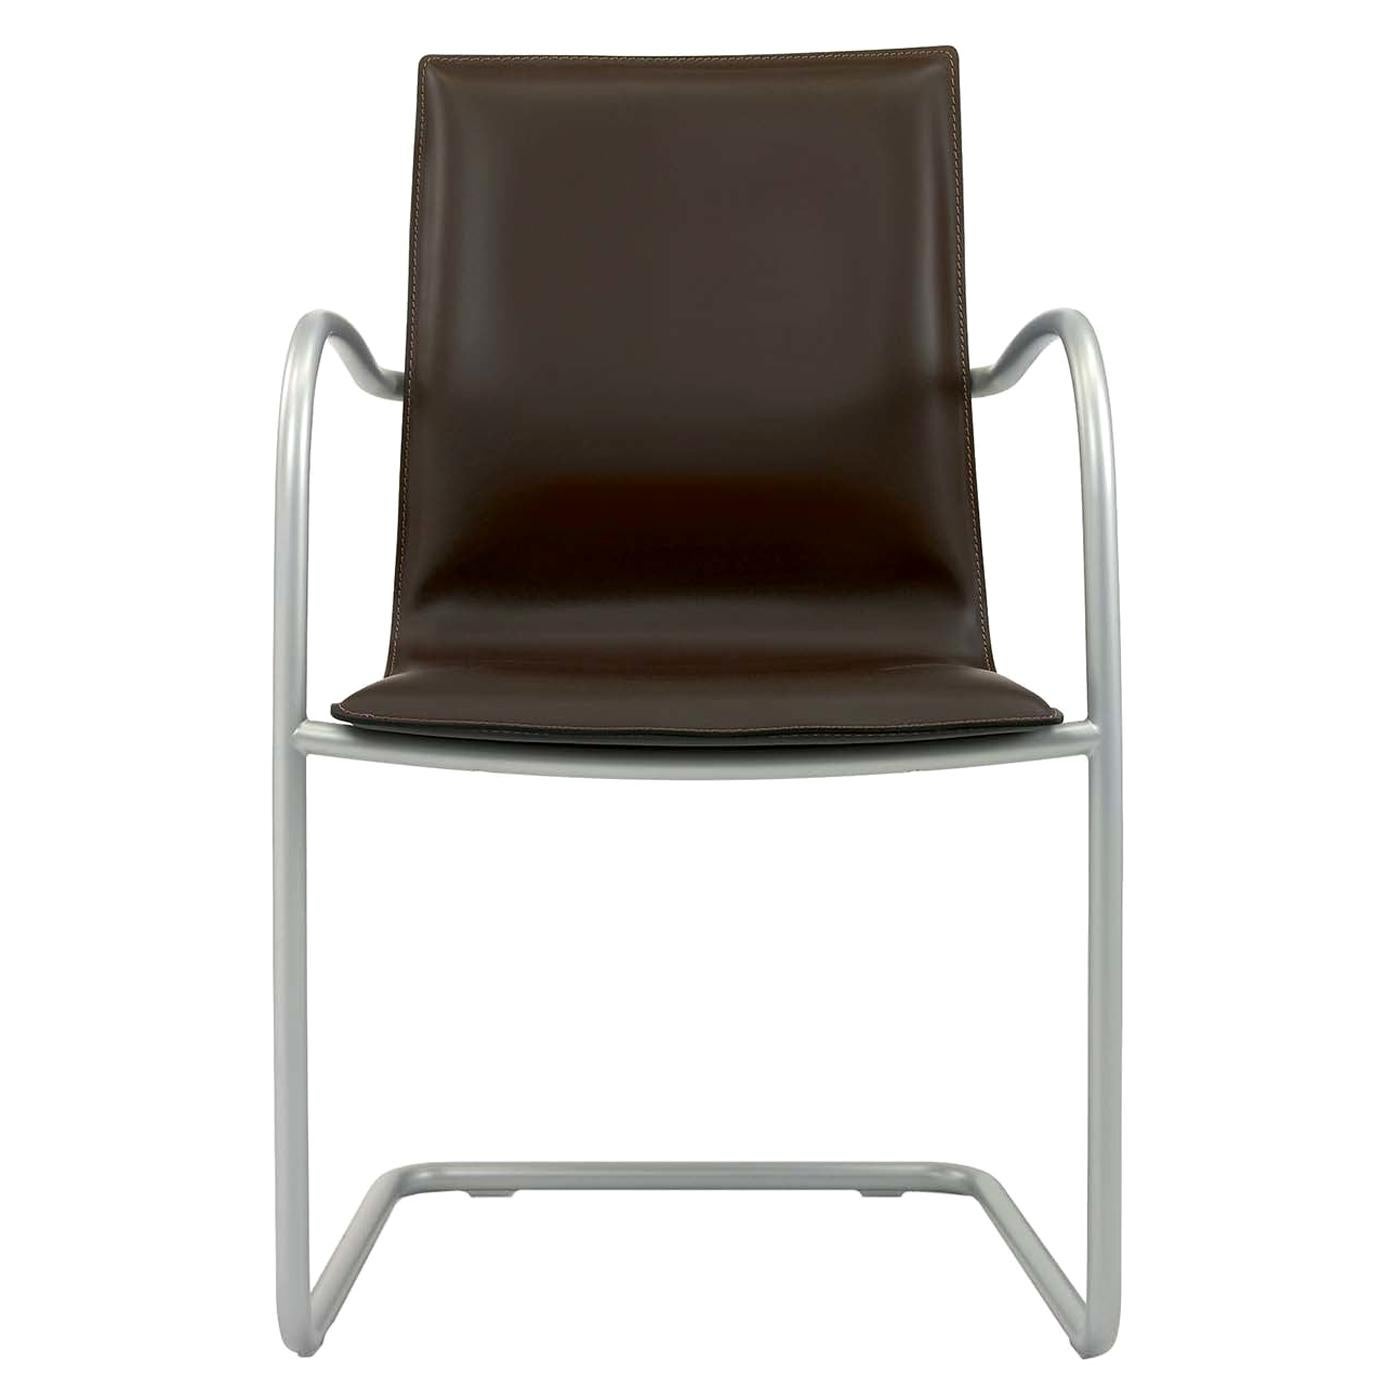 Micad Comfort Armchair by Michele Cadore For Sale